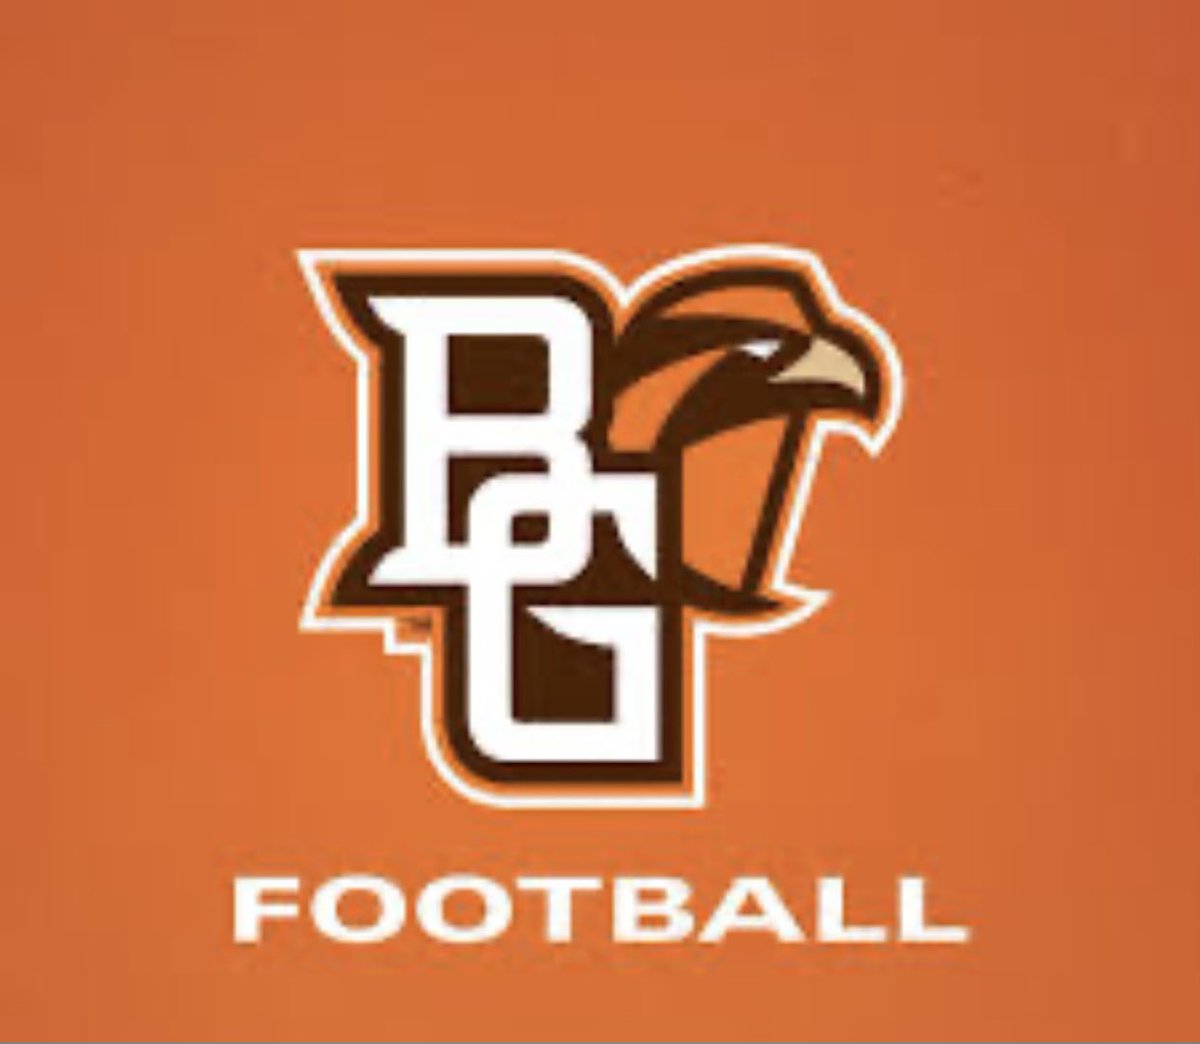 After A Great Conversation with Coach Campbell @ErikCampbell I am Blessed to Receive My First D1 Offer from @BG_Football @coachwill247 @EliteAthletes_